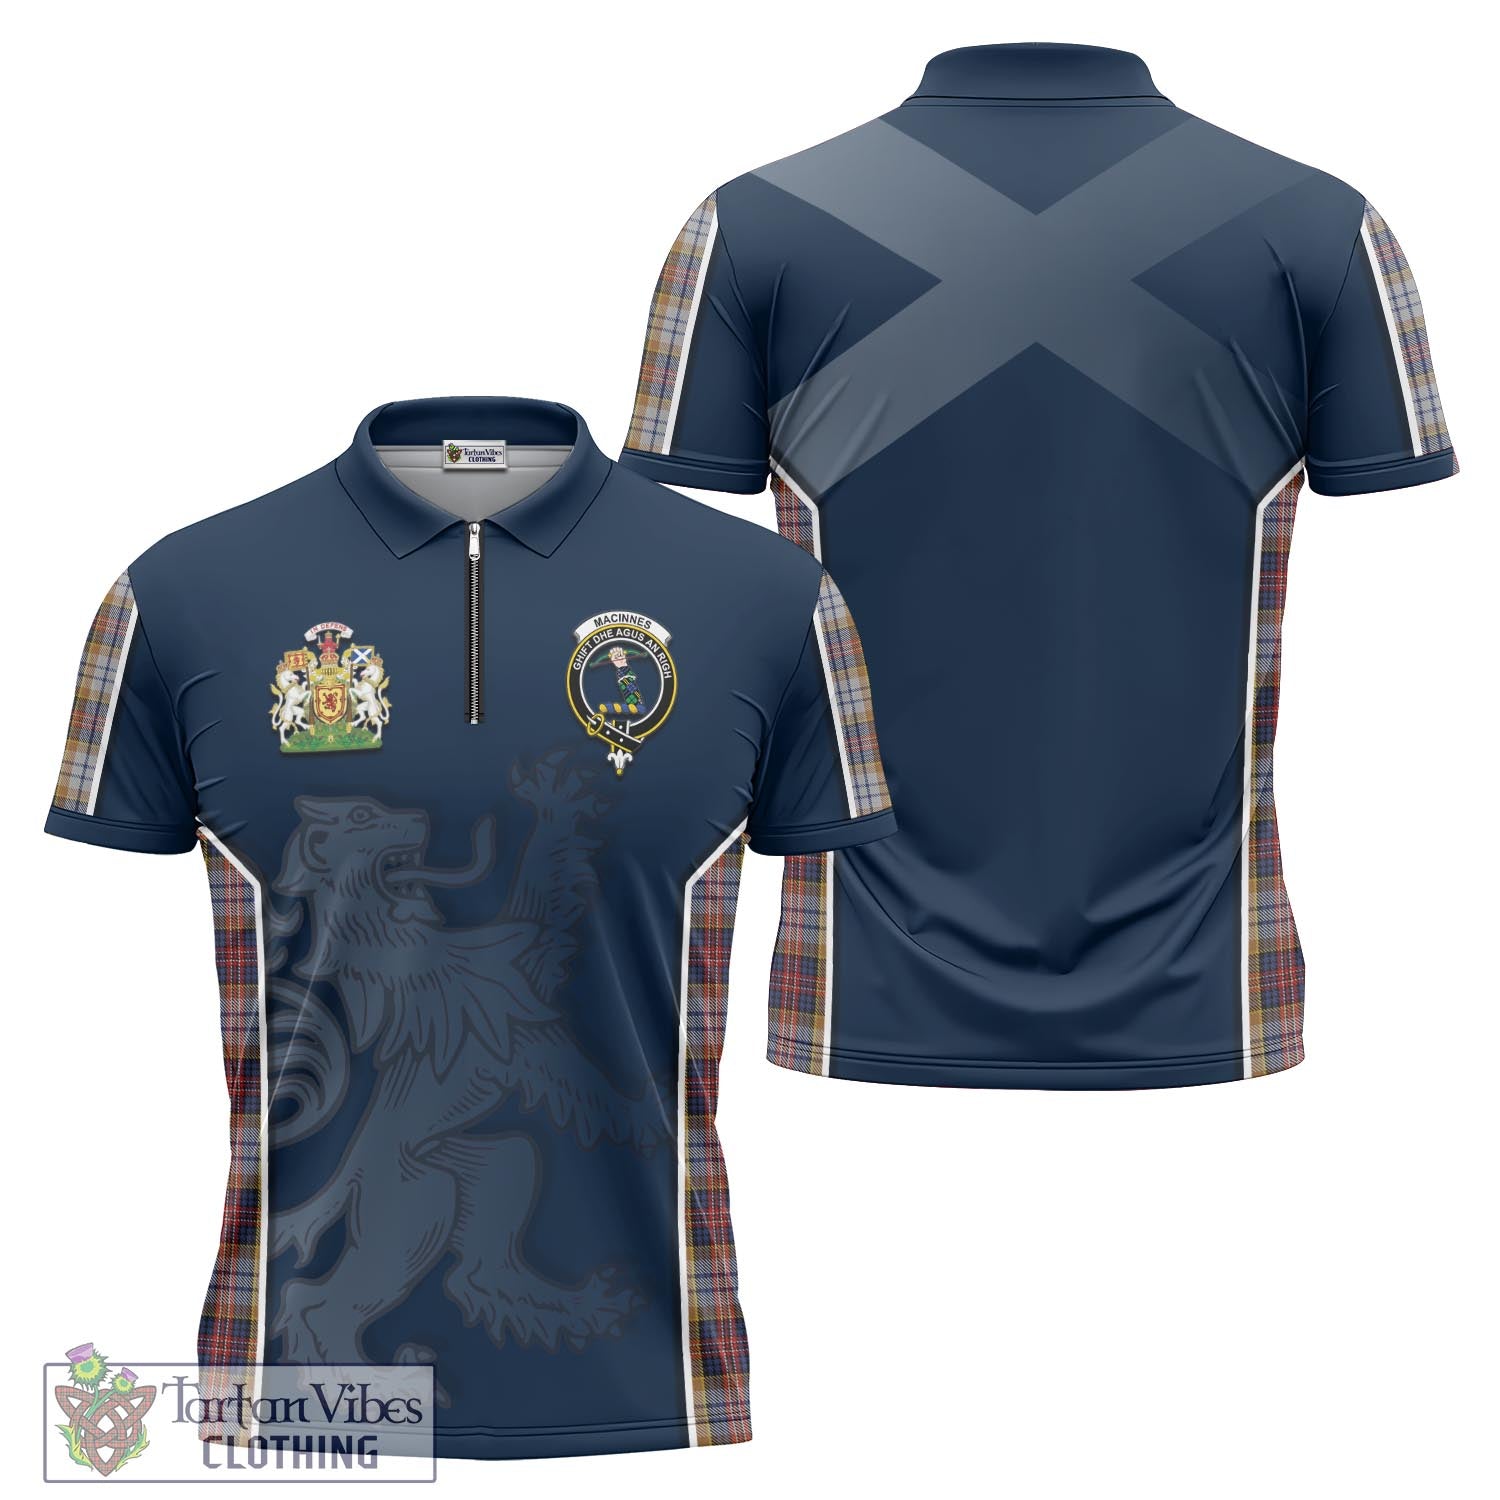 Tartan Vibes Clothing MacInnes Ancient Hunting Tartan Zipper Polo Shirt with Family Crest and Lion Rampant Vibes Sport Style